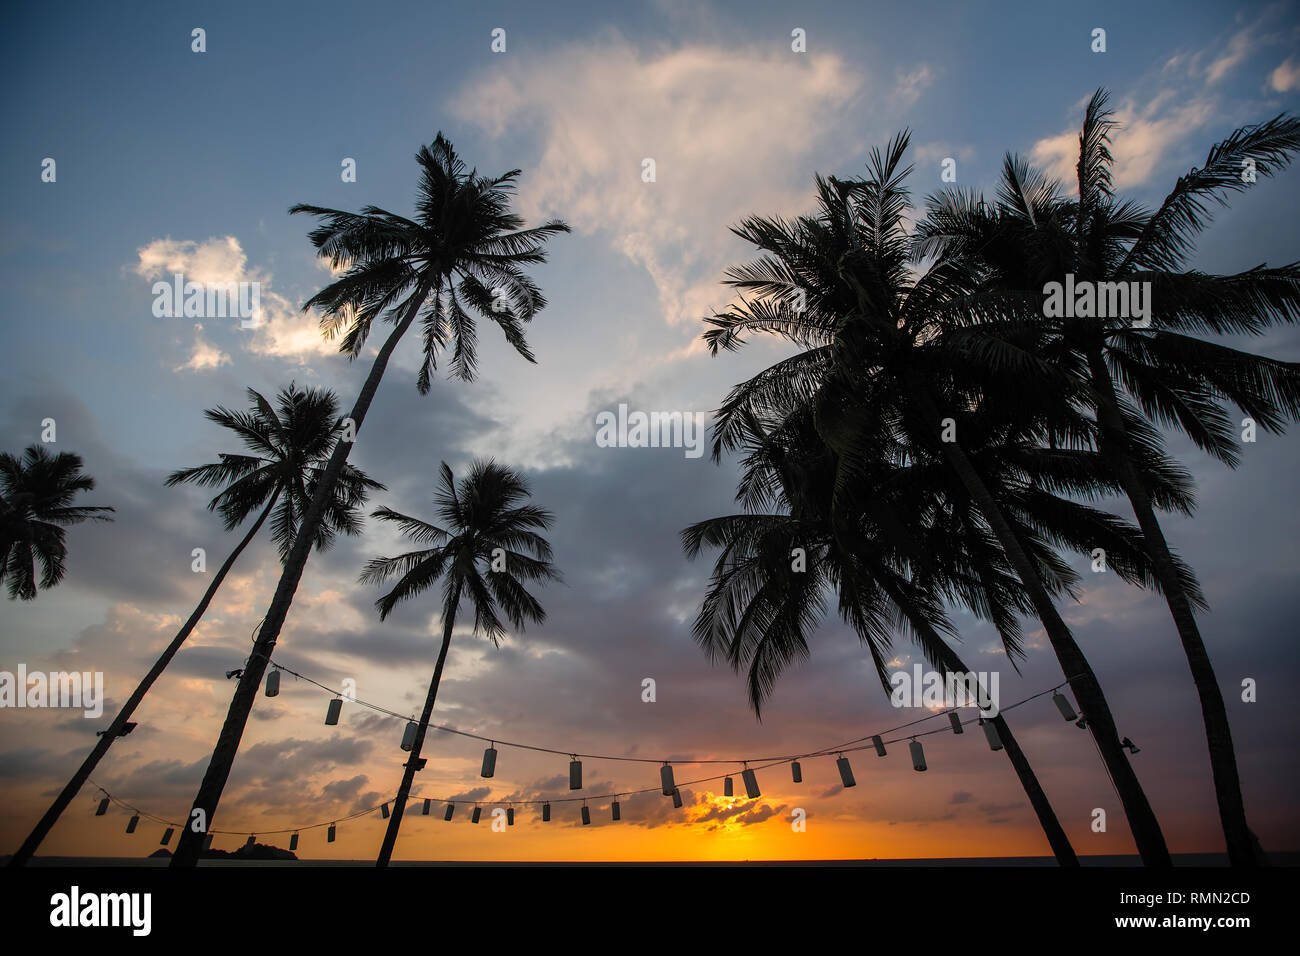 Tropical palm trees silhouetted against a dusk blue sky. Stock Photo